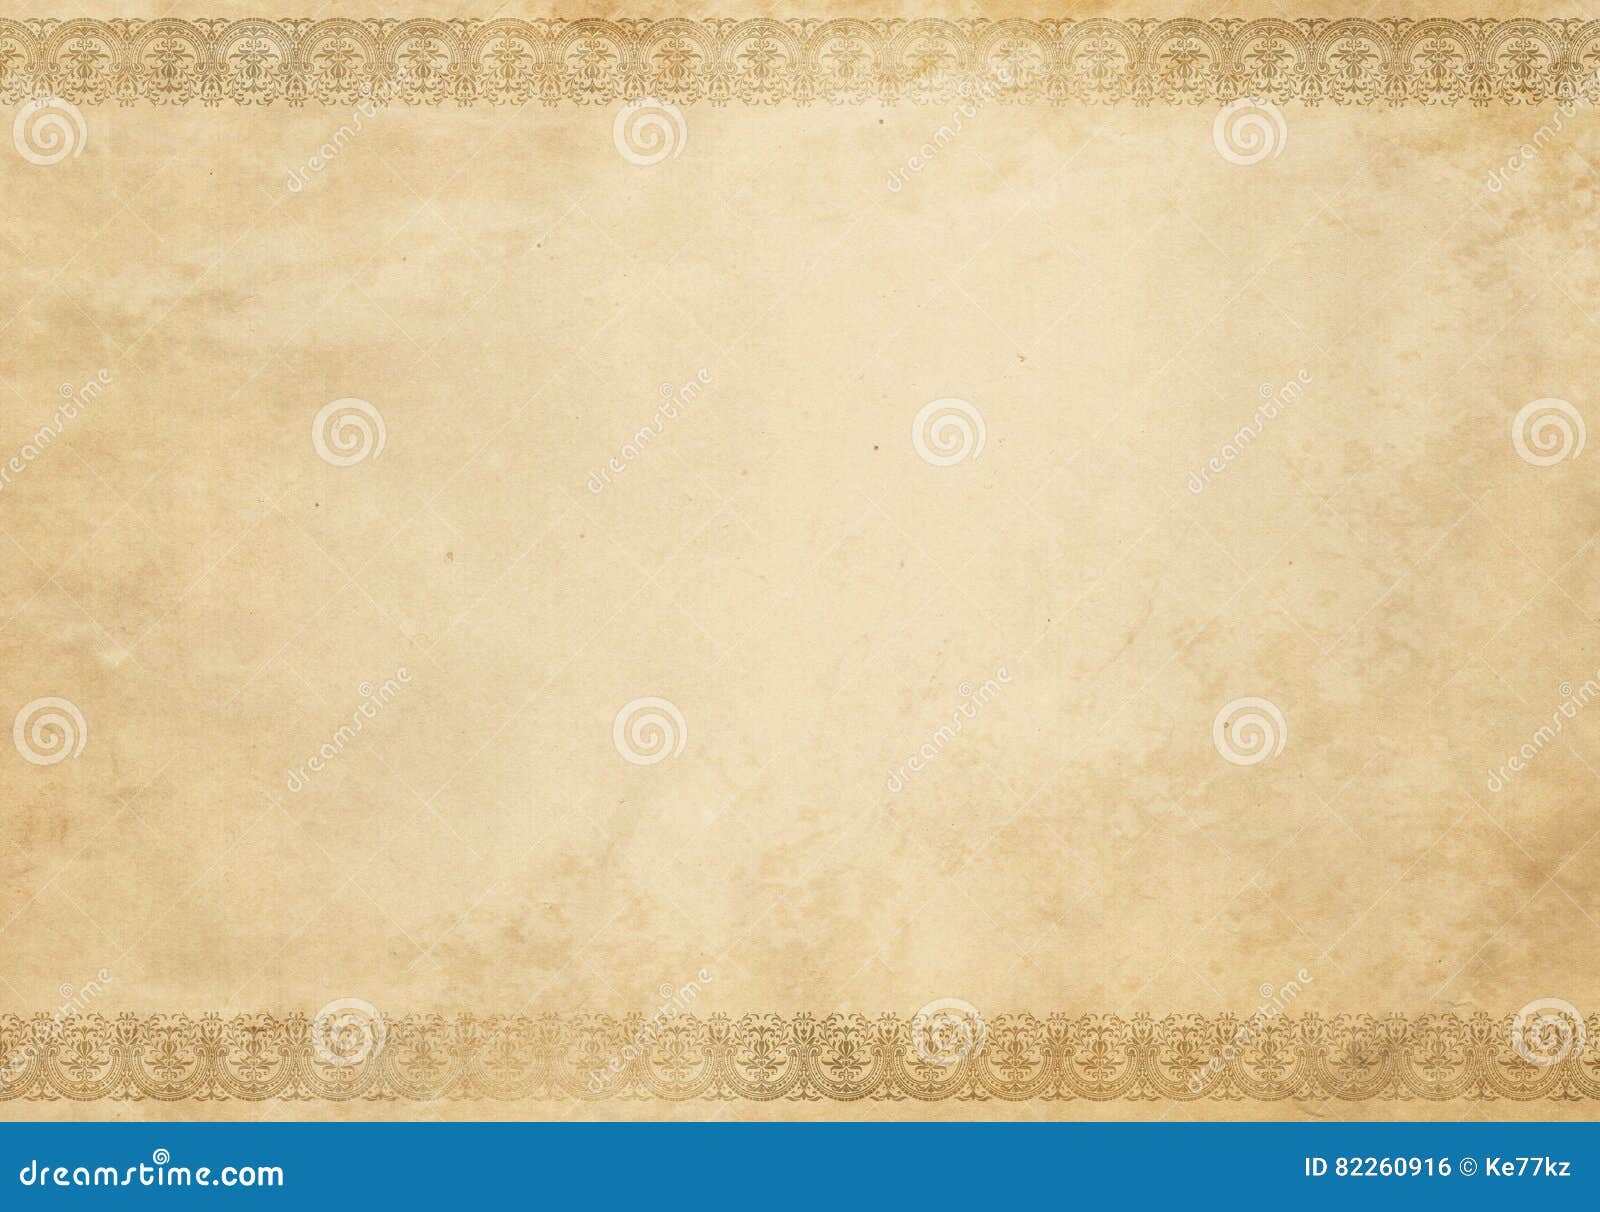 Old Paper Background And Decorative Frame. Natural Paper Texture For The  Design. Stock Photo, Picture and Royalty Free Image. Image 35526692.